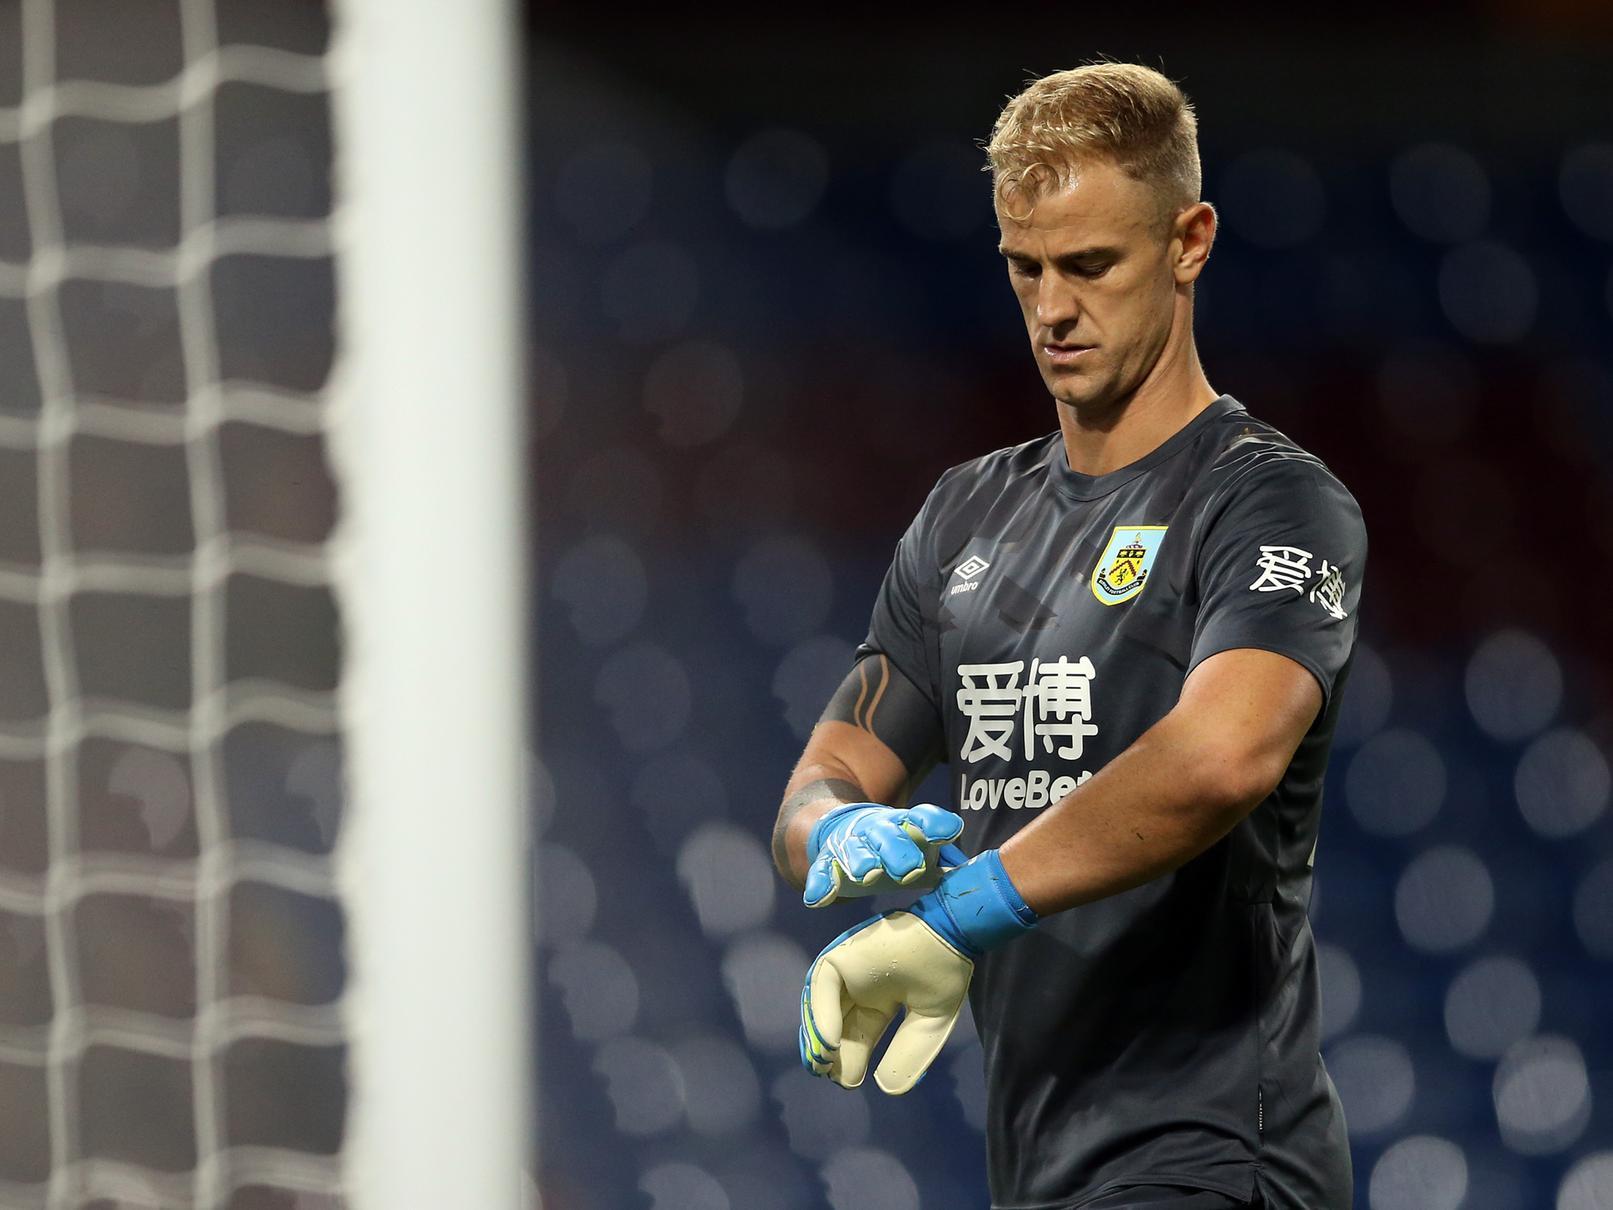 Ever wondered how much Joe Hart's motor cost? We've got you covered.